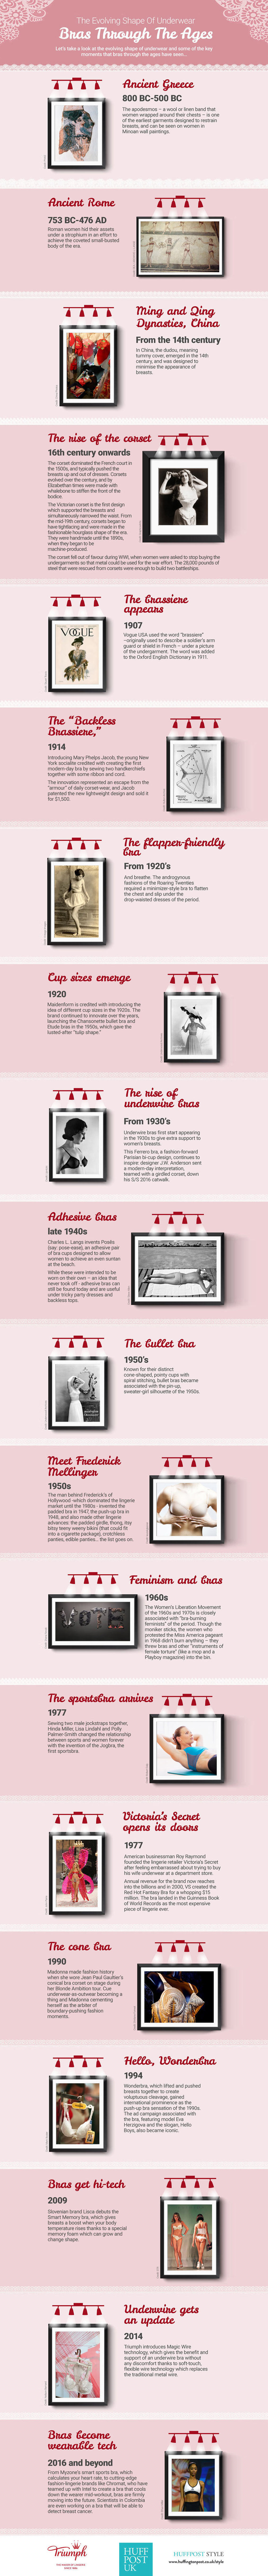 Evolution of the Bra - Brassiere History Infographic